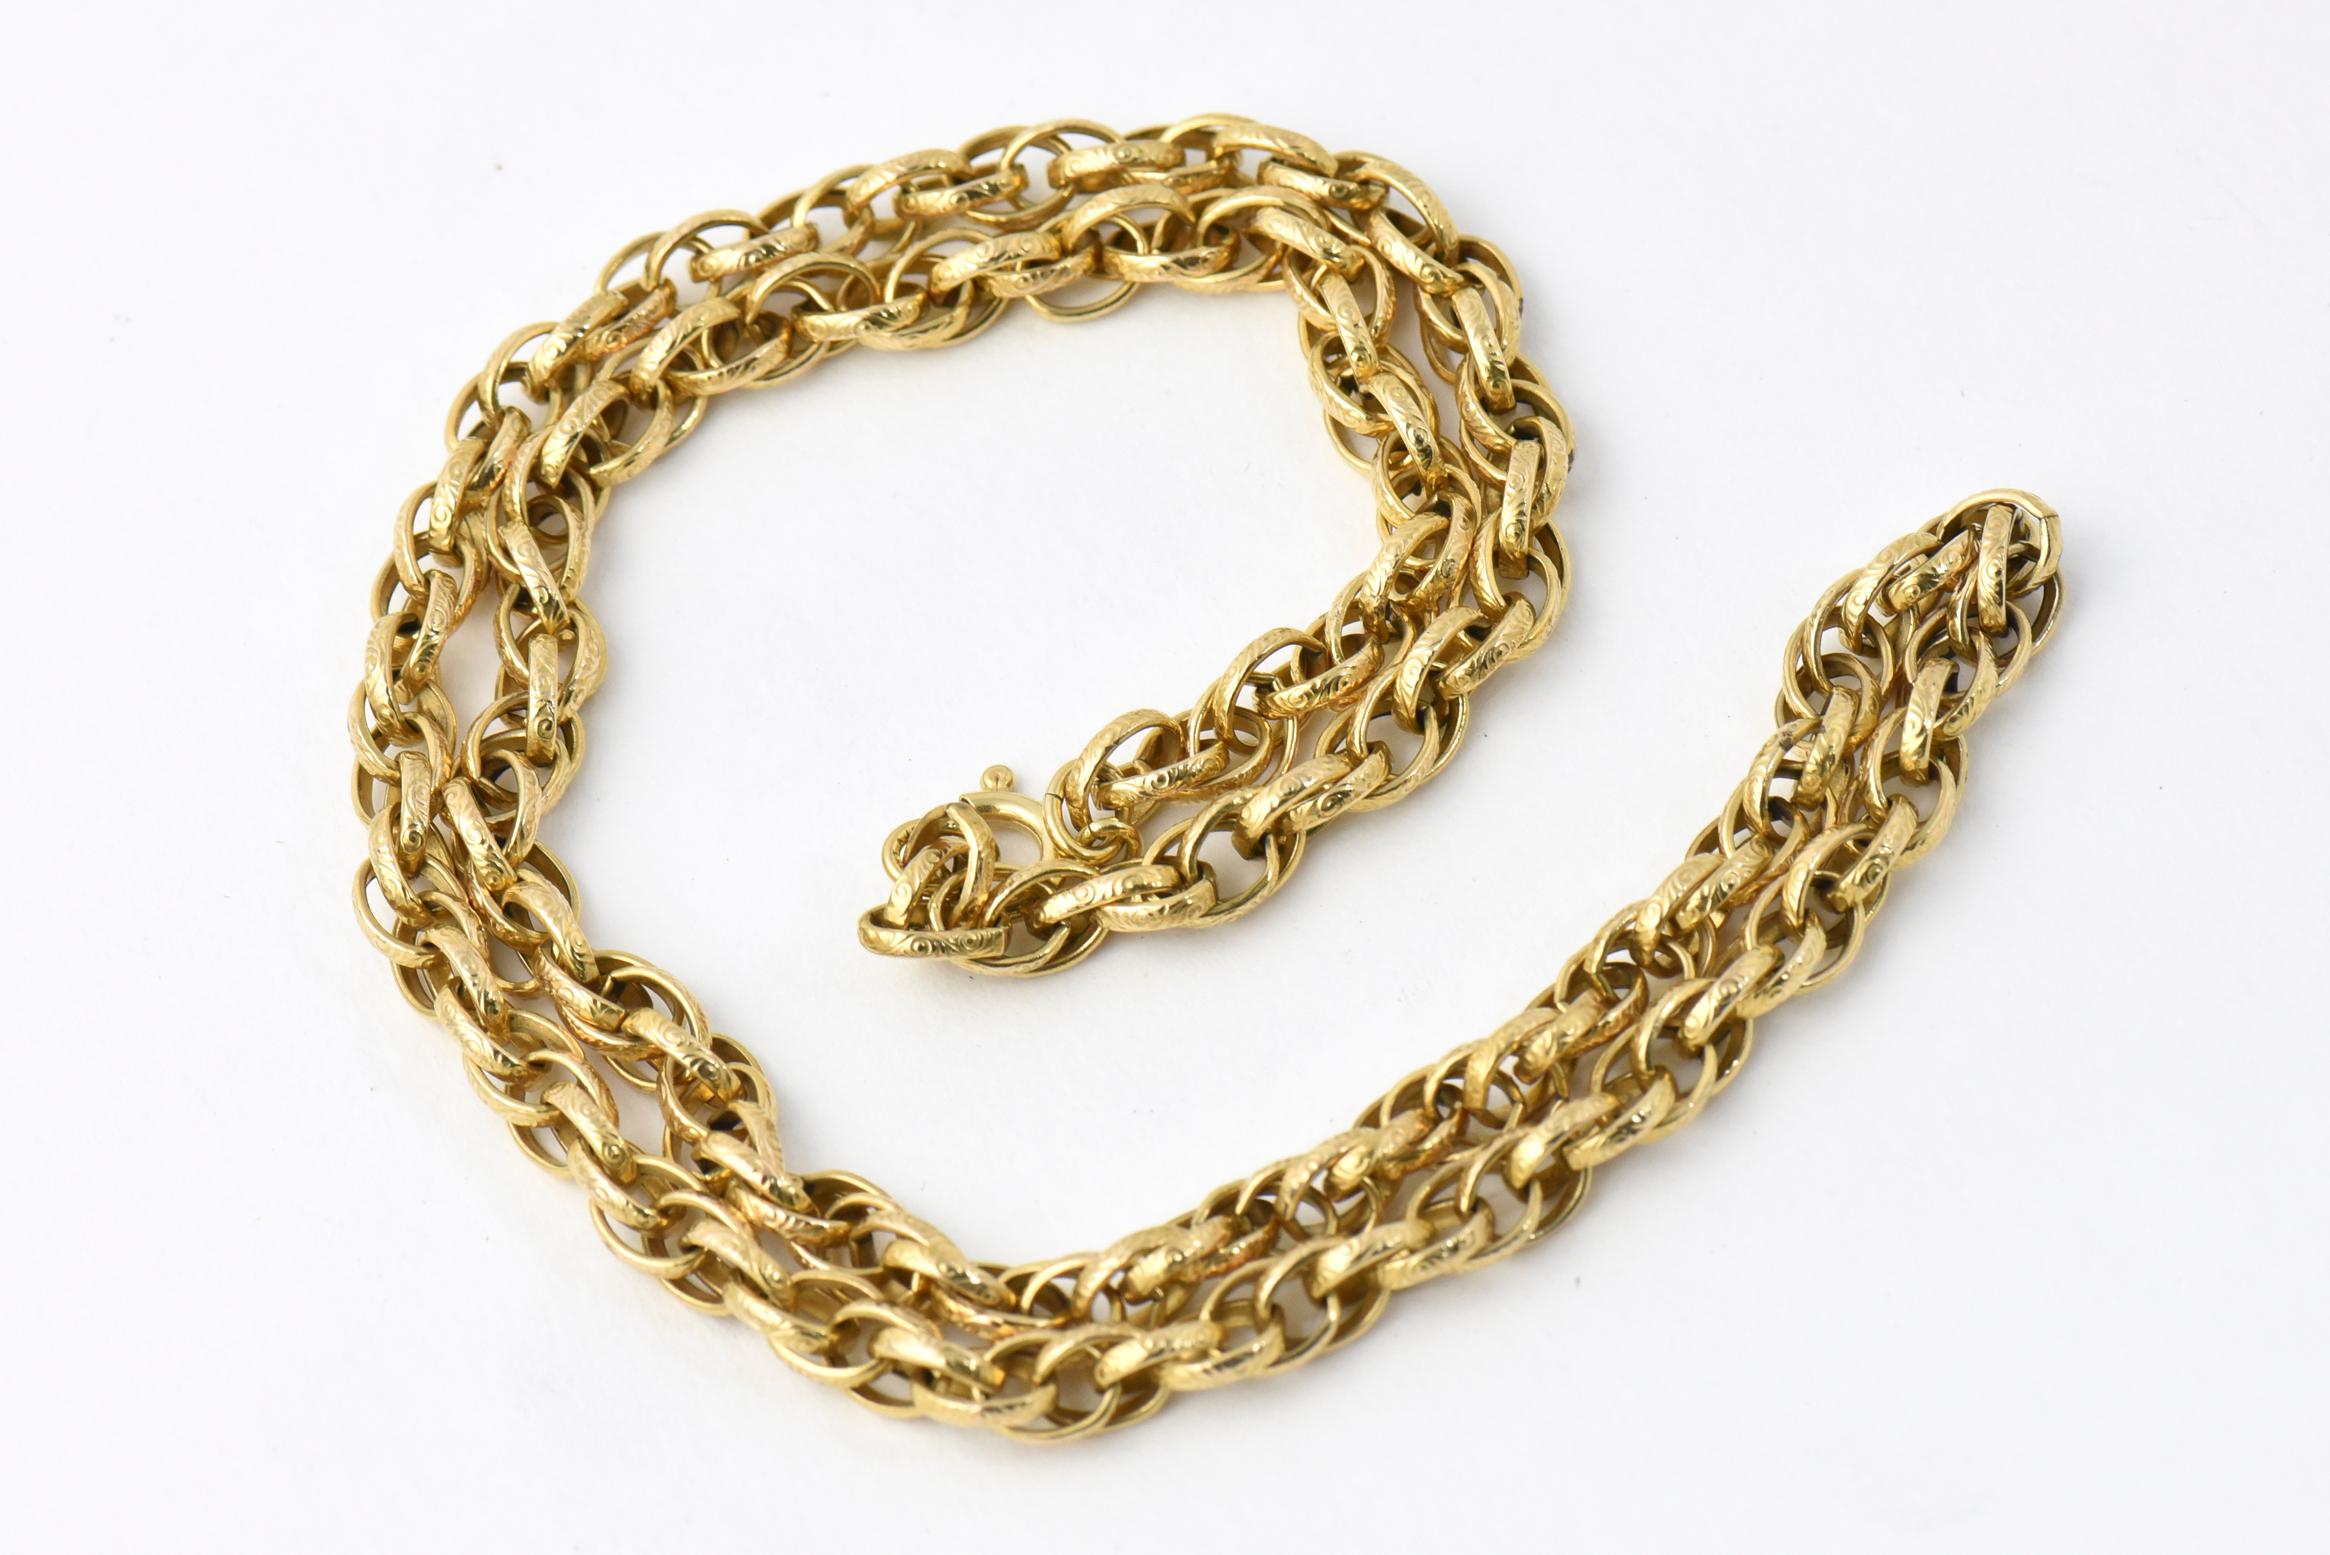 Victorian handmade etched 10K gold chain link necklace with newer 18K gold jump ring clasp. Clasp marked: 750 (18K); chain acid tests as 10K. Necklace, 24